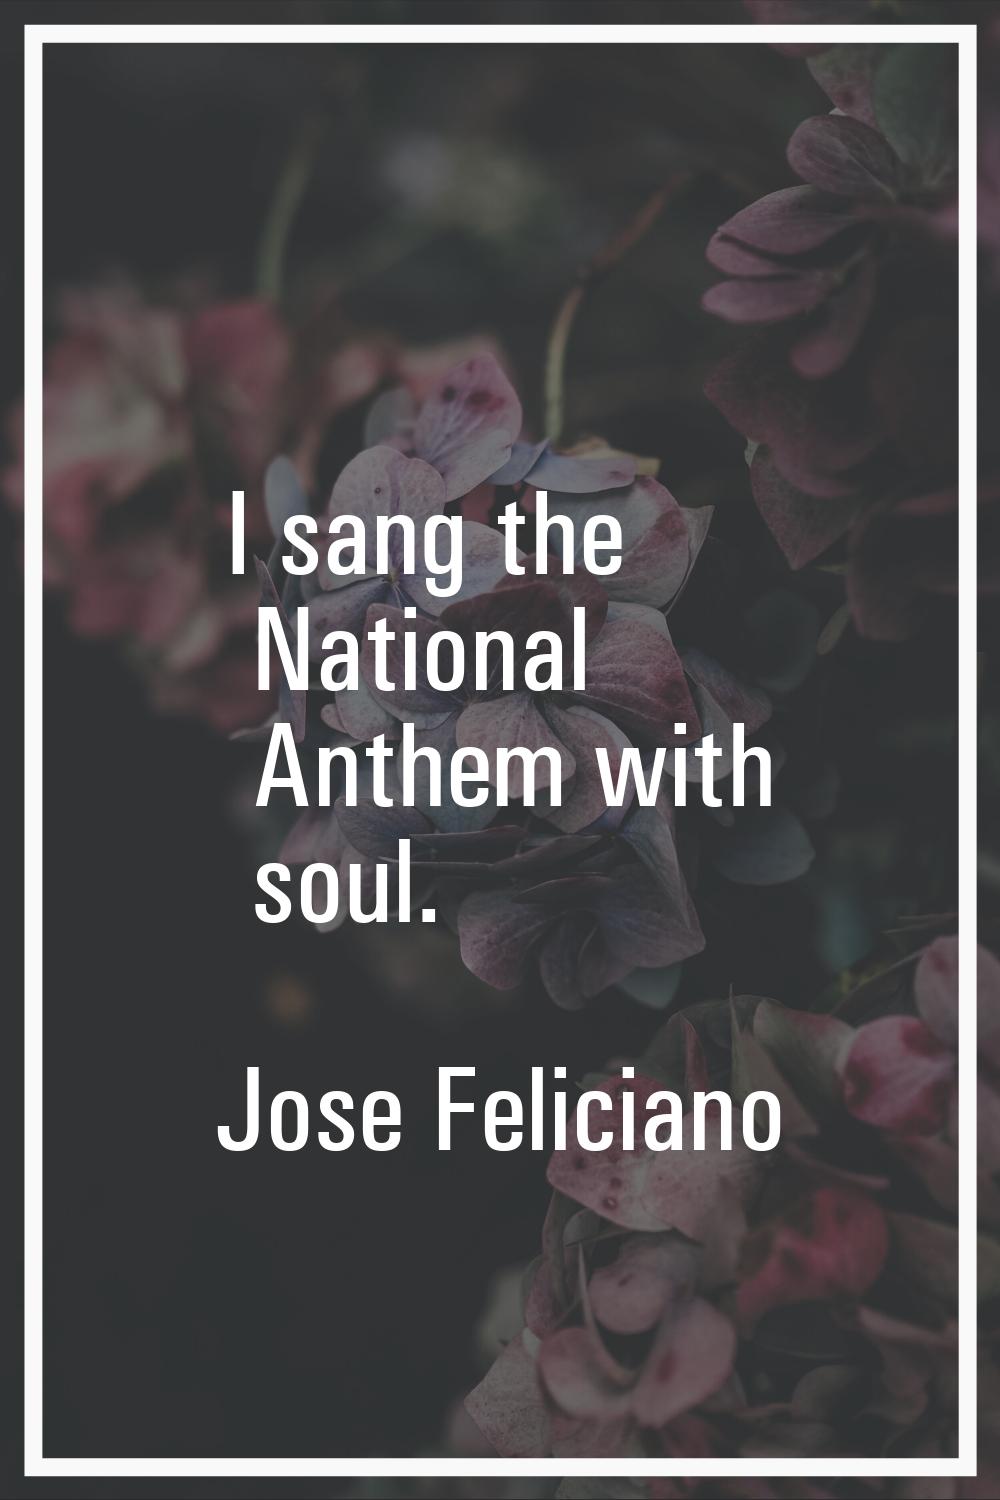 I sang the National Anthem with soul.